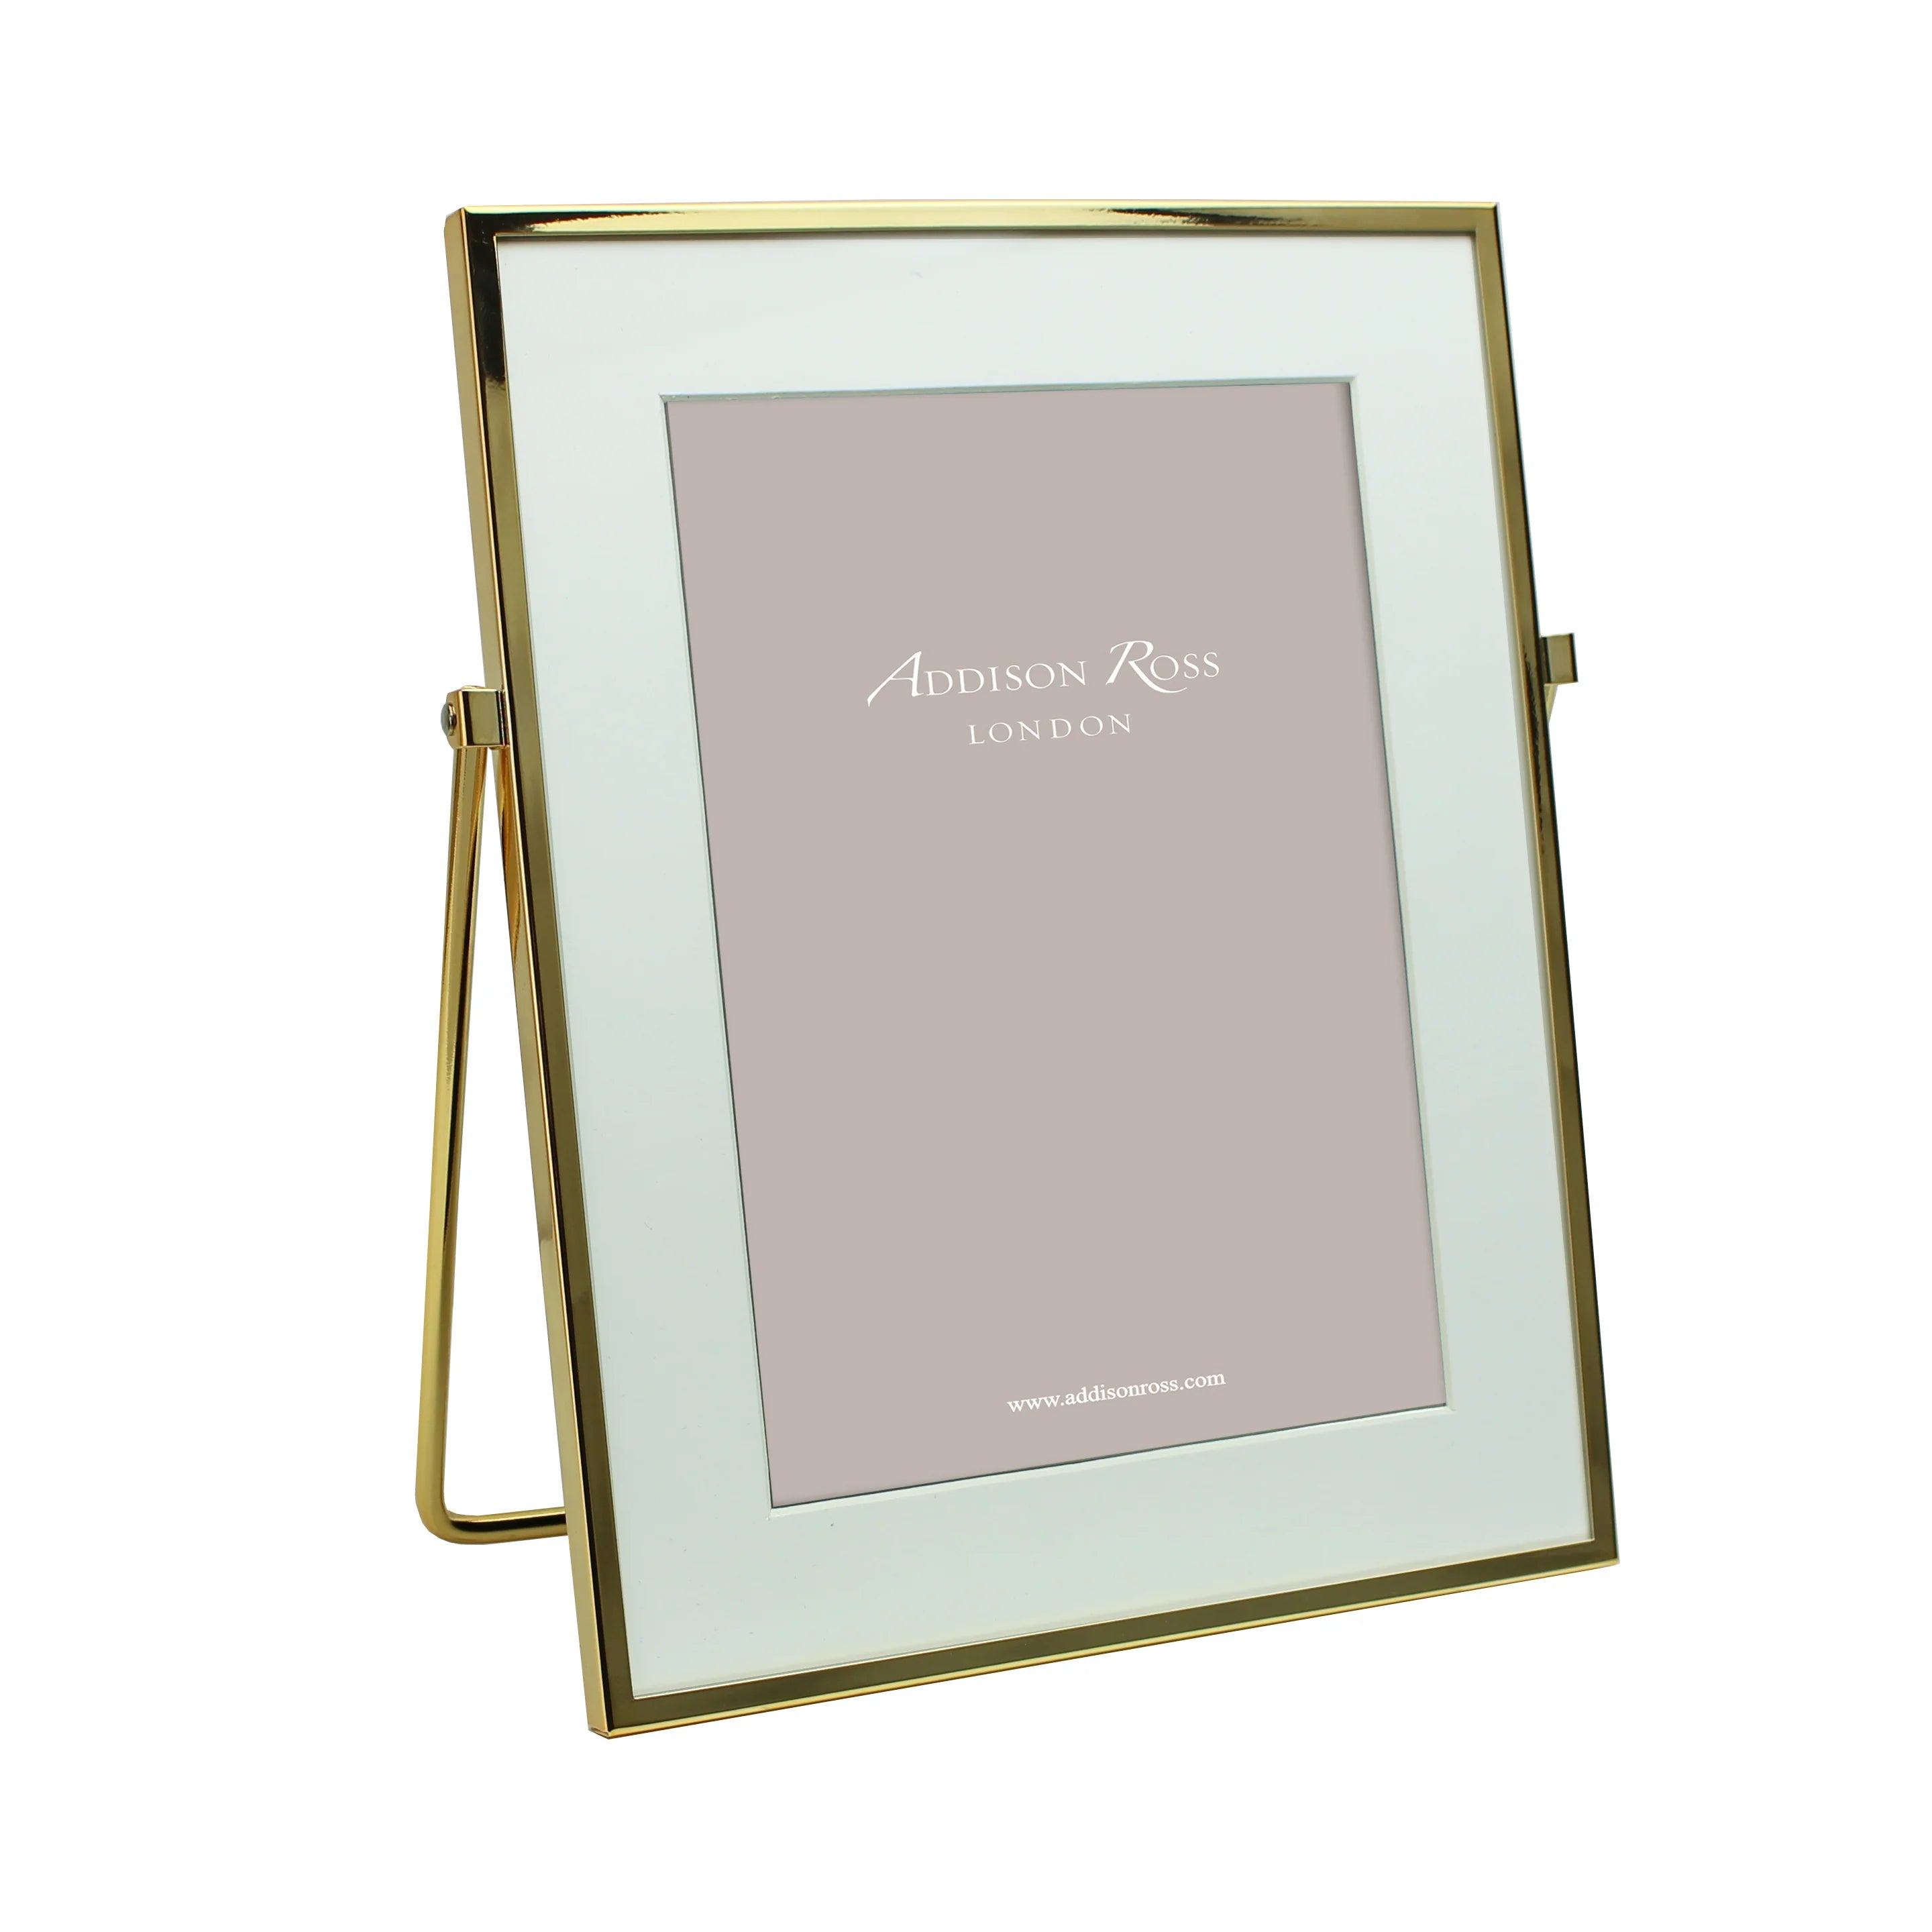 4 x 6 Gold Plated Easel Frame – Stewart House